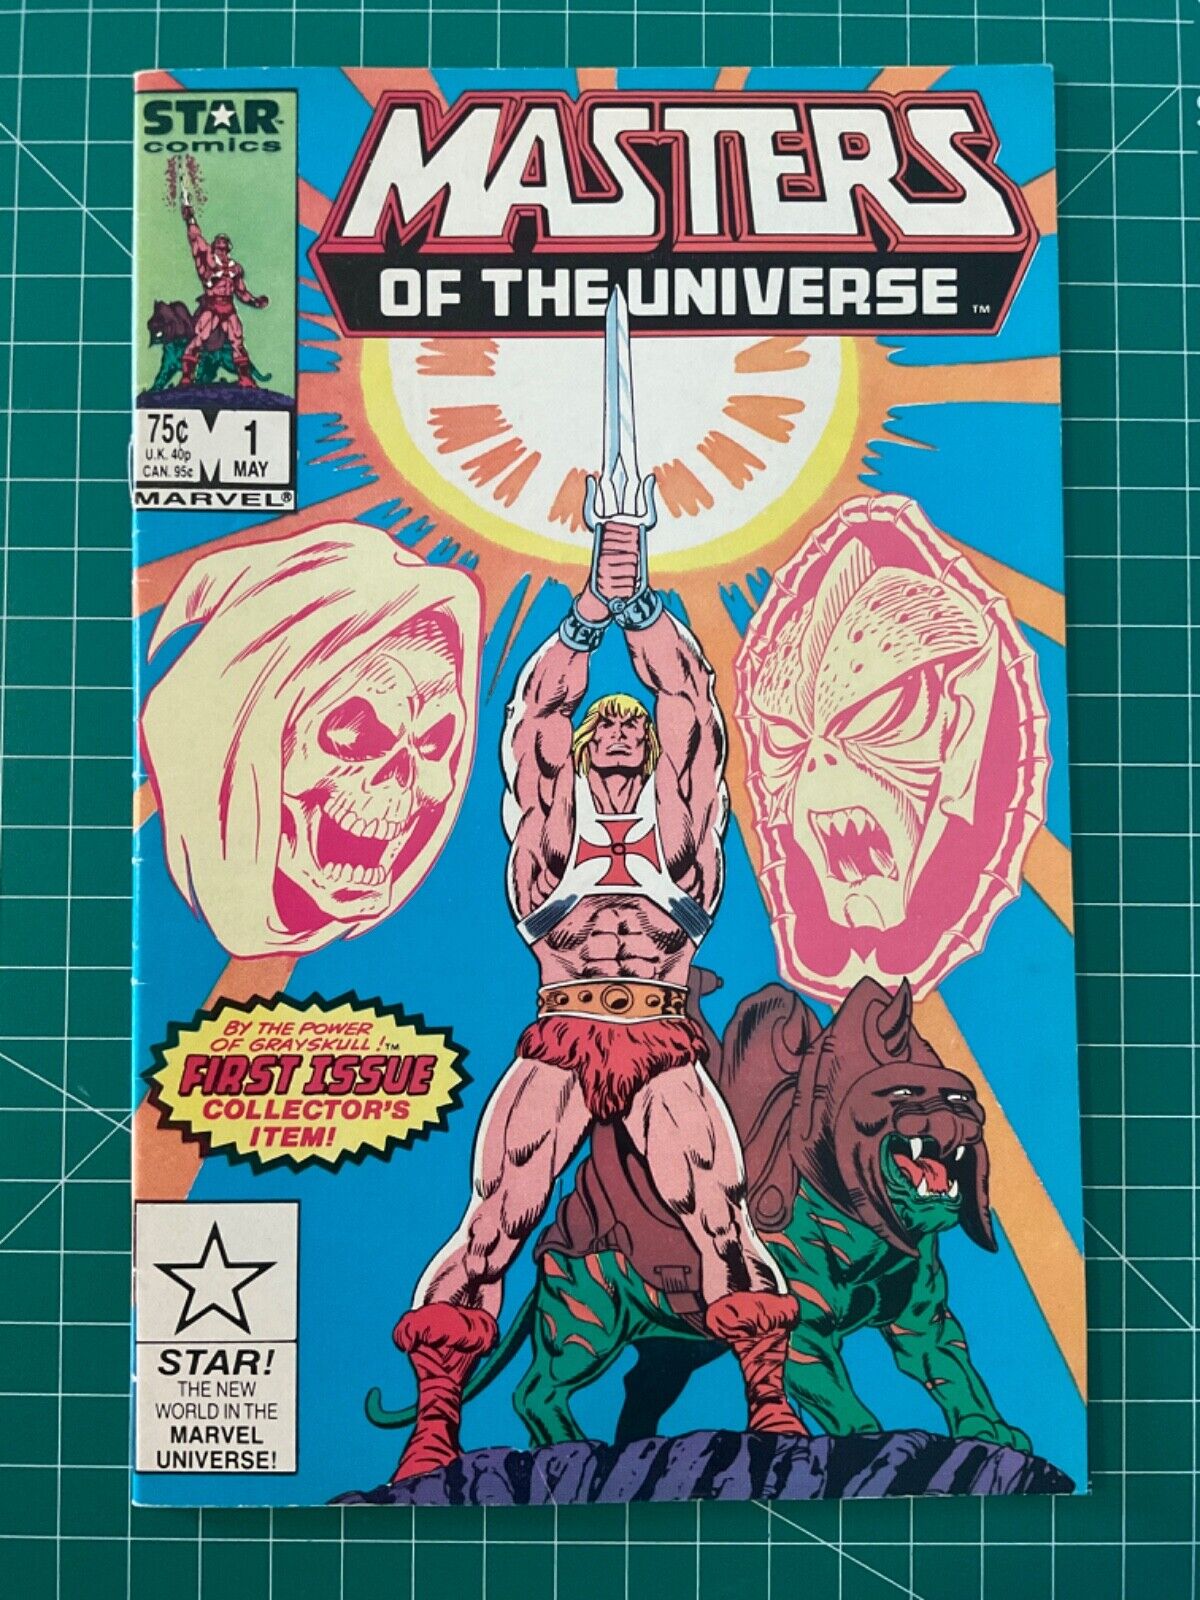 Masters of the Universe #1 First Issue Star Comics 1986 He-Man Marvel